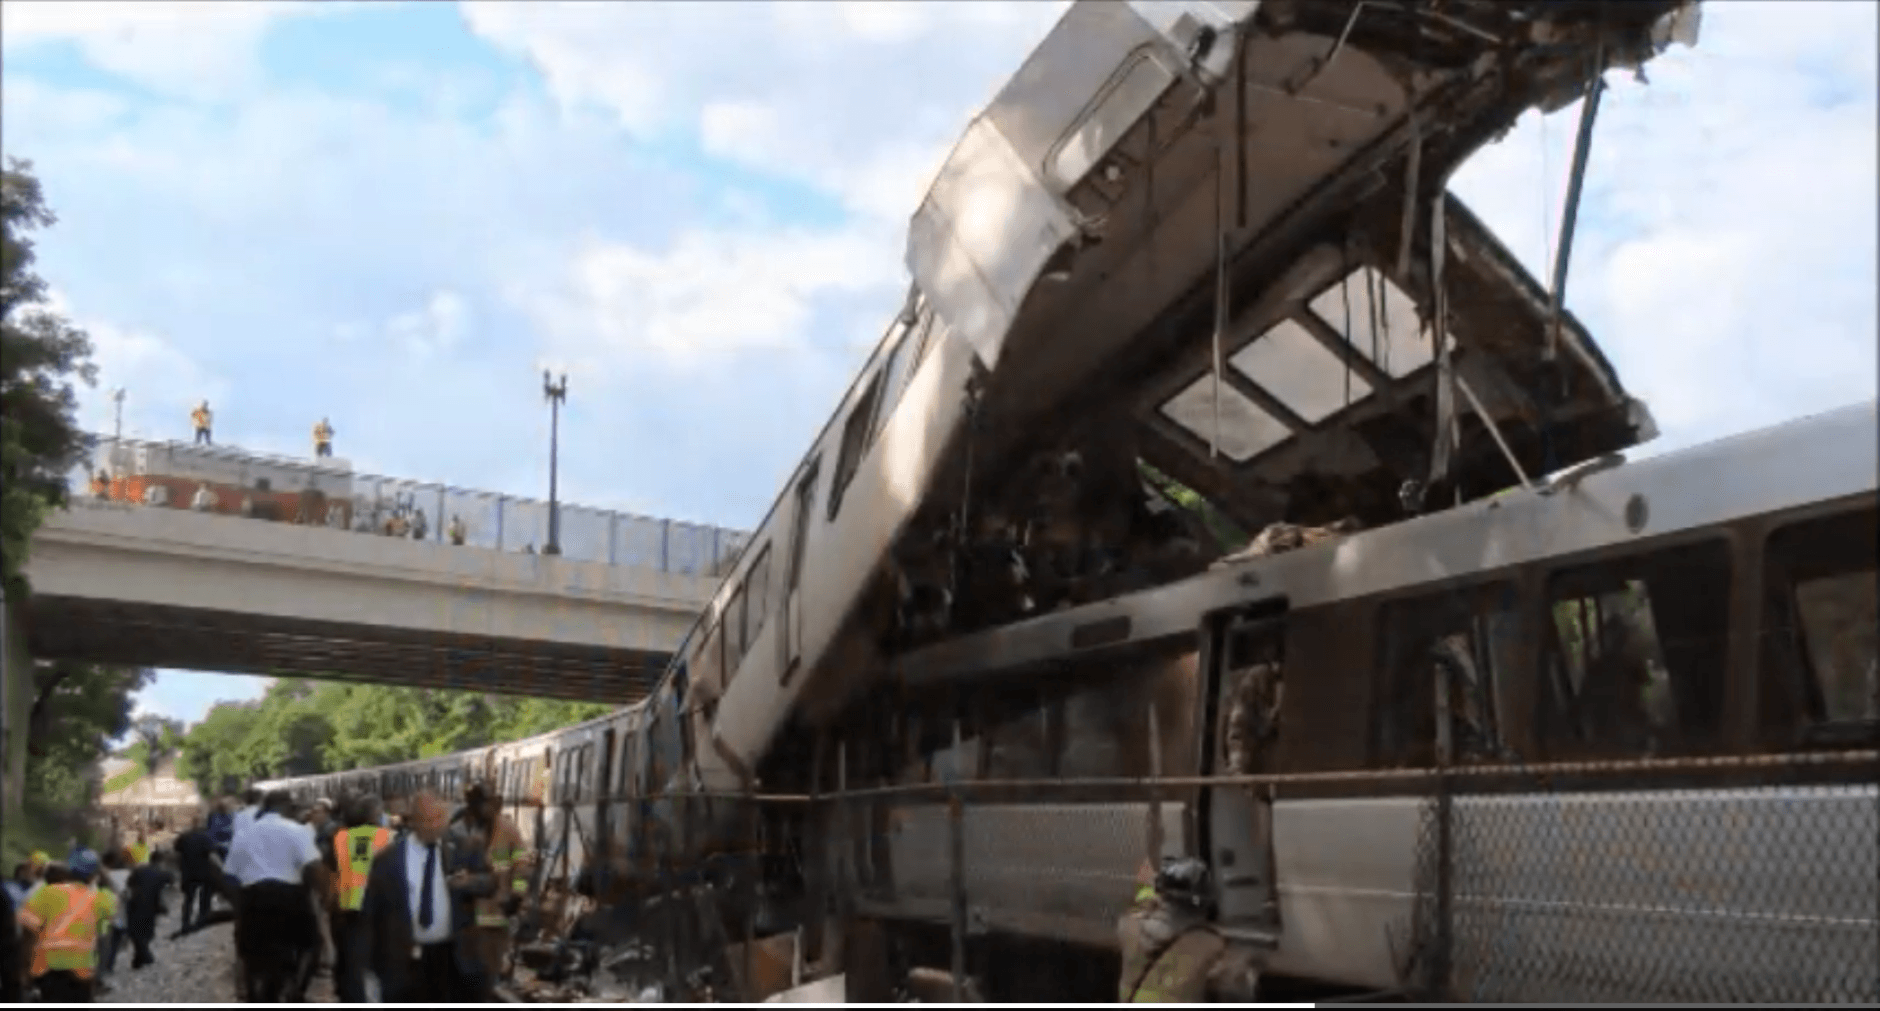 A screenshot from a DC Fire and EMS documentary shows one train on top of another. (Courtesy DC Fire and EMS)